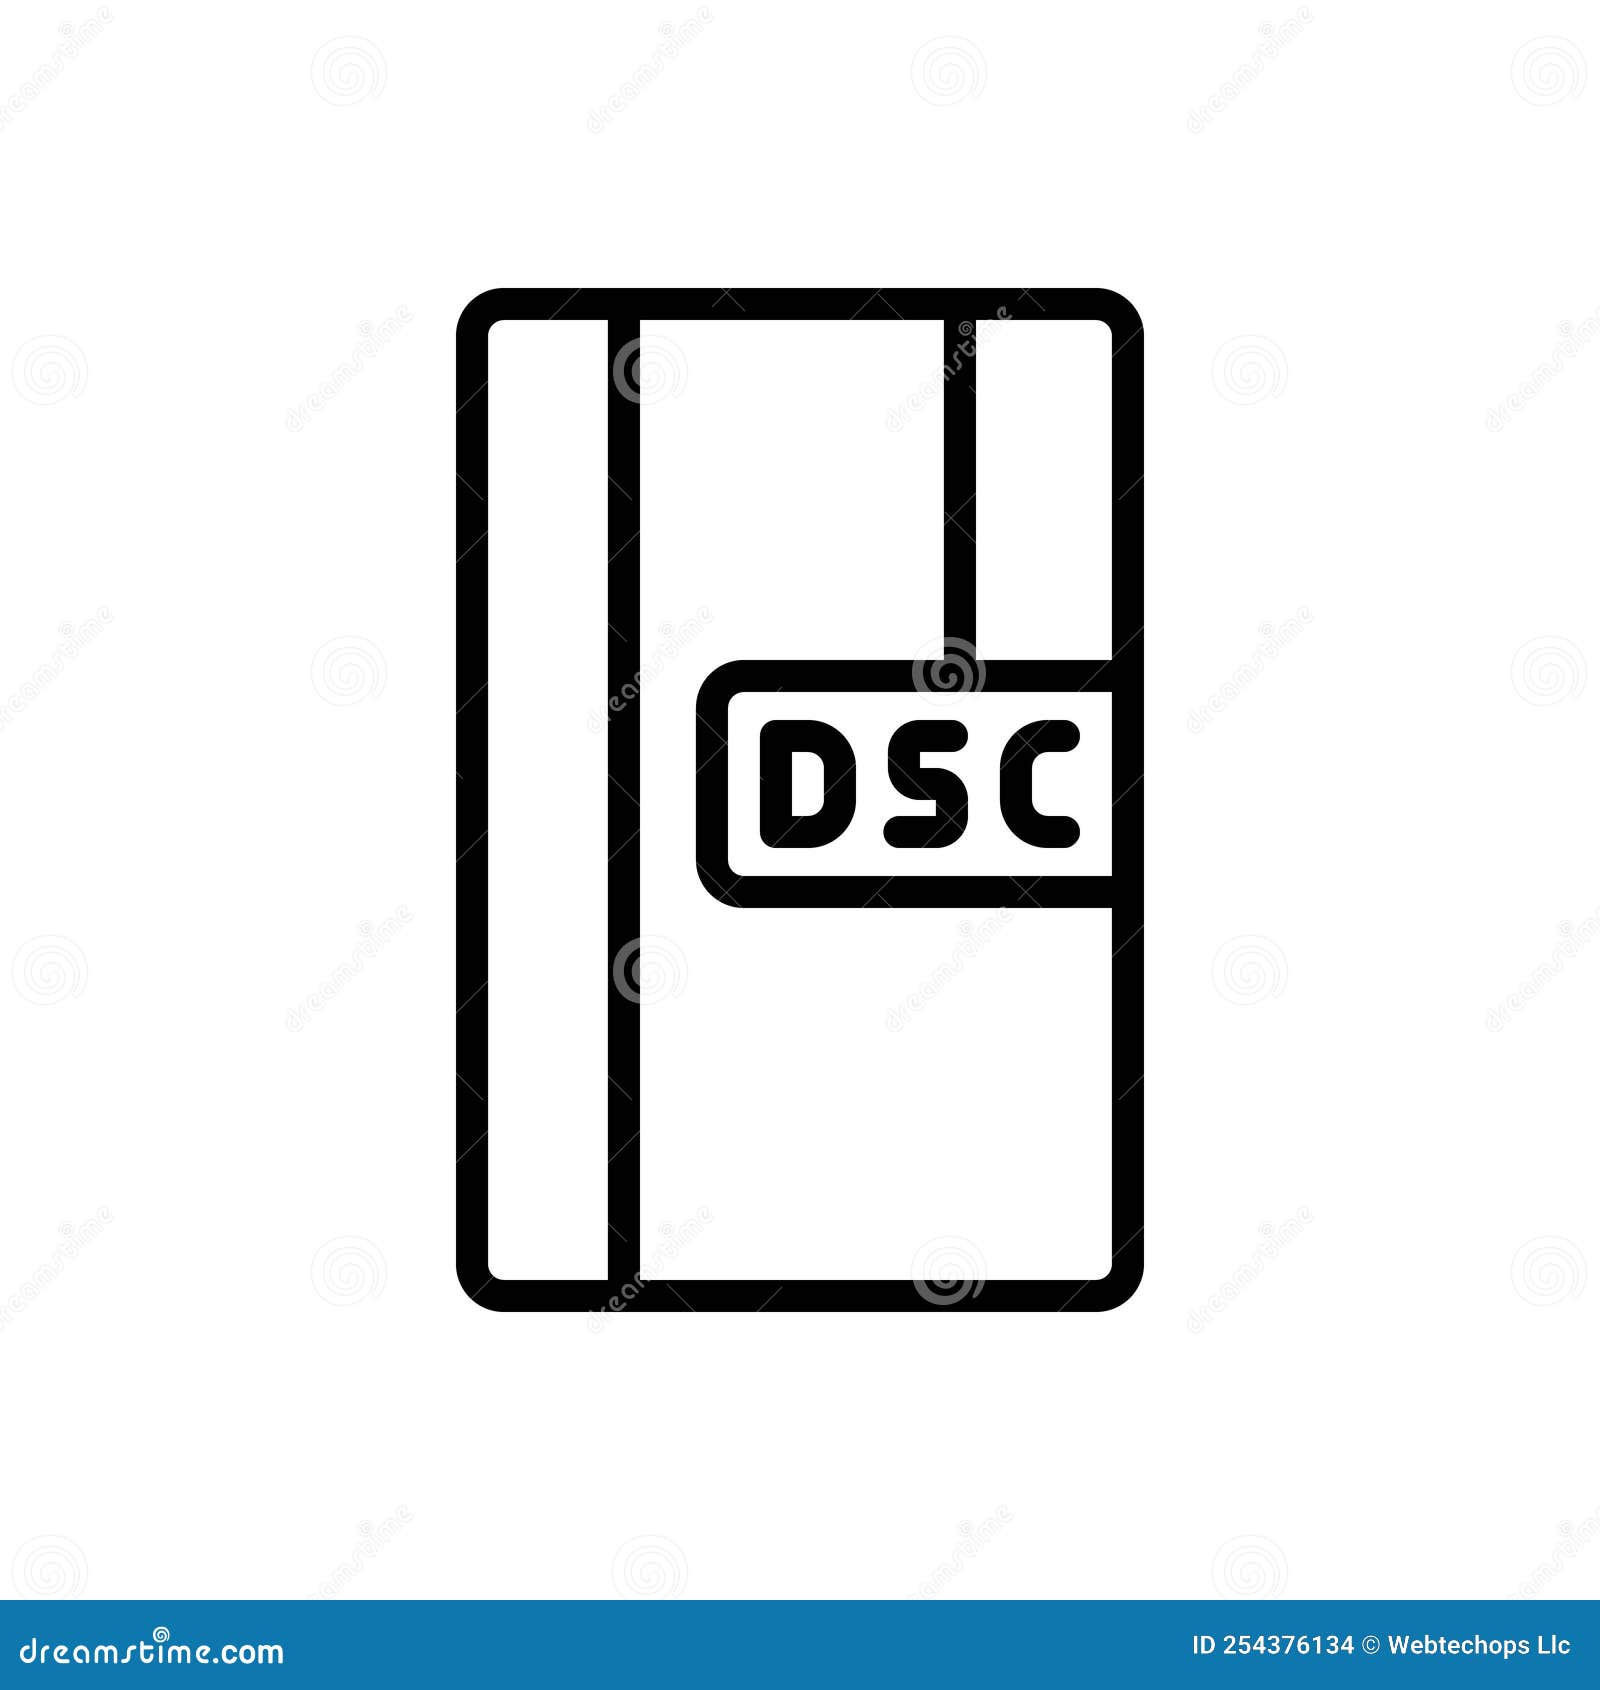 black line icon for dsc, application and file